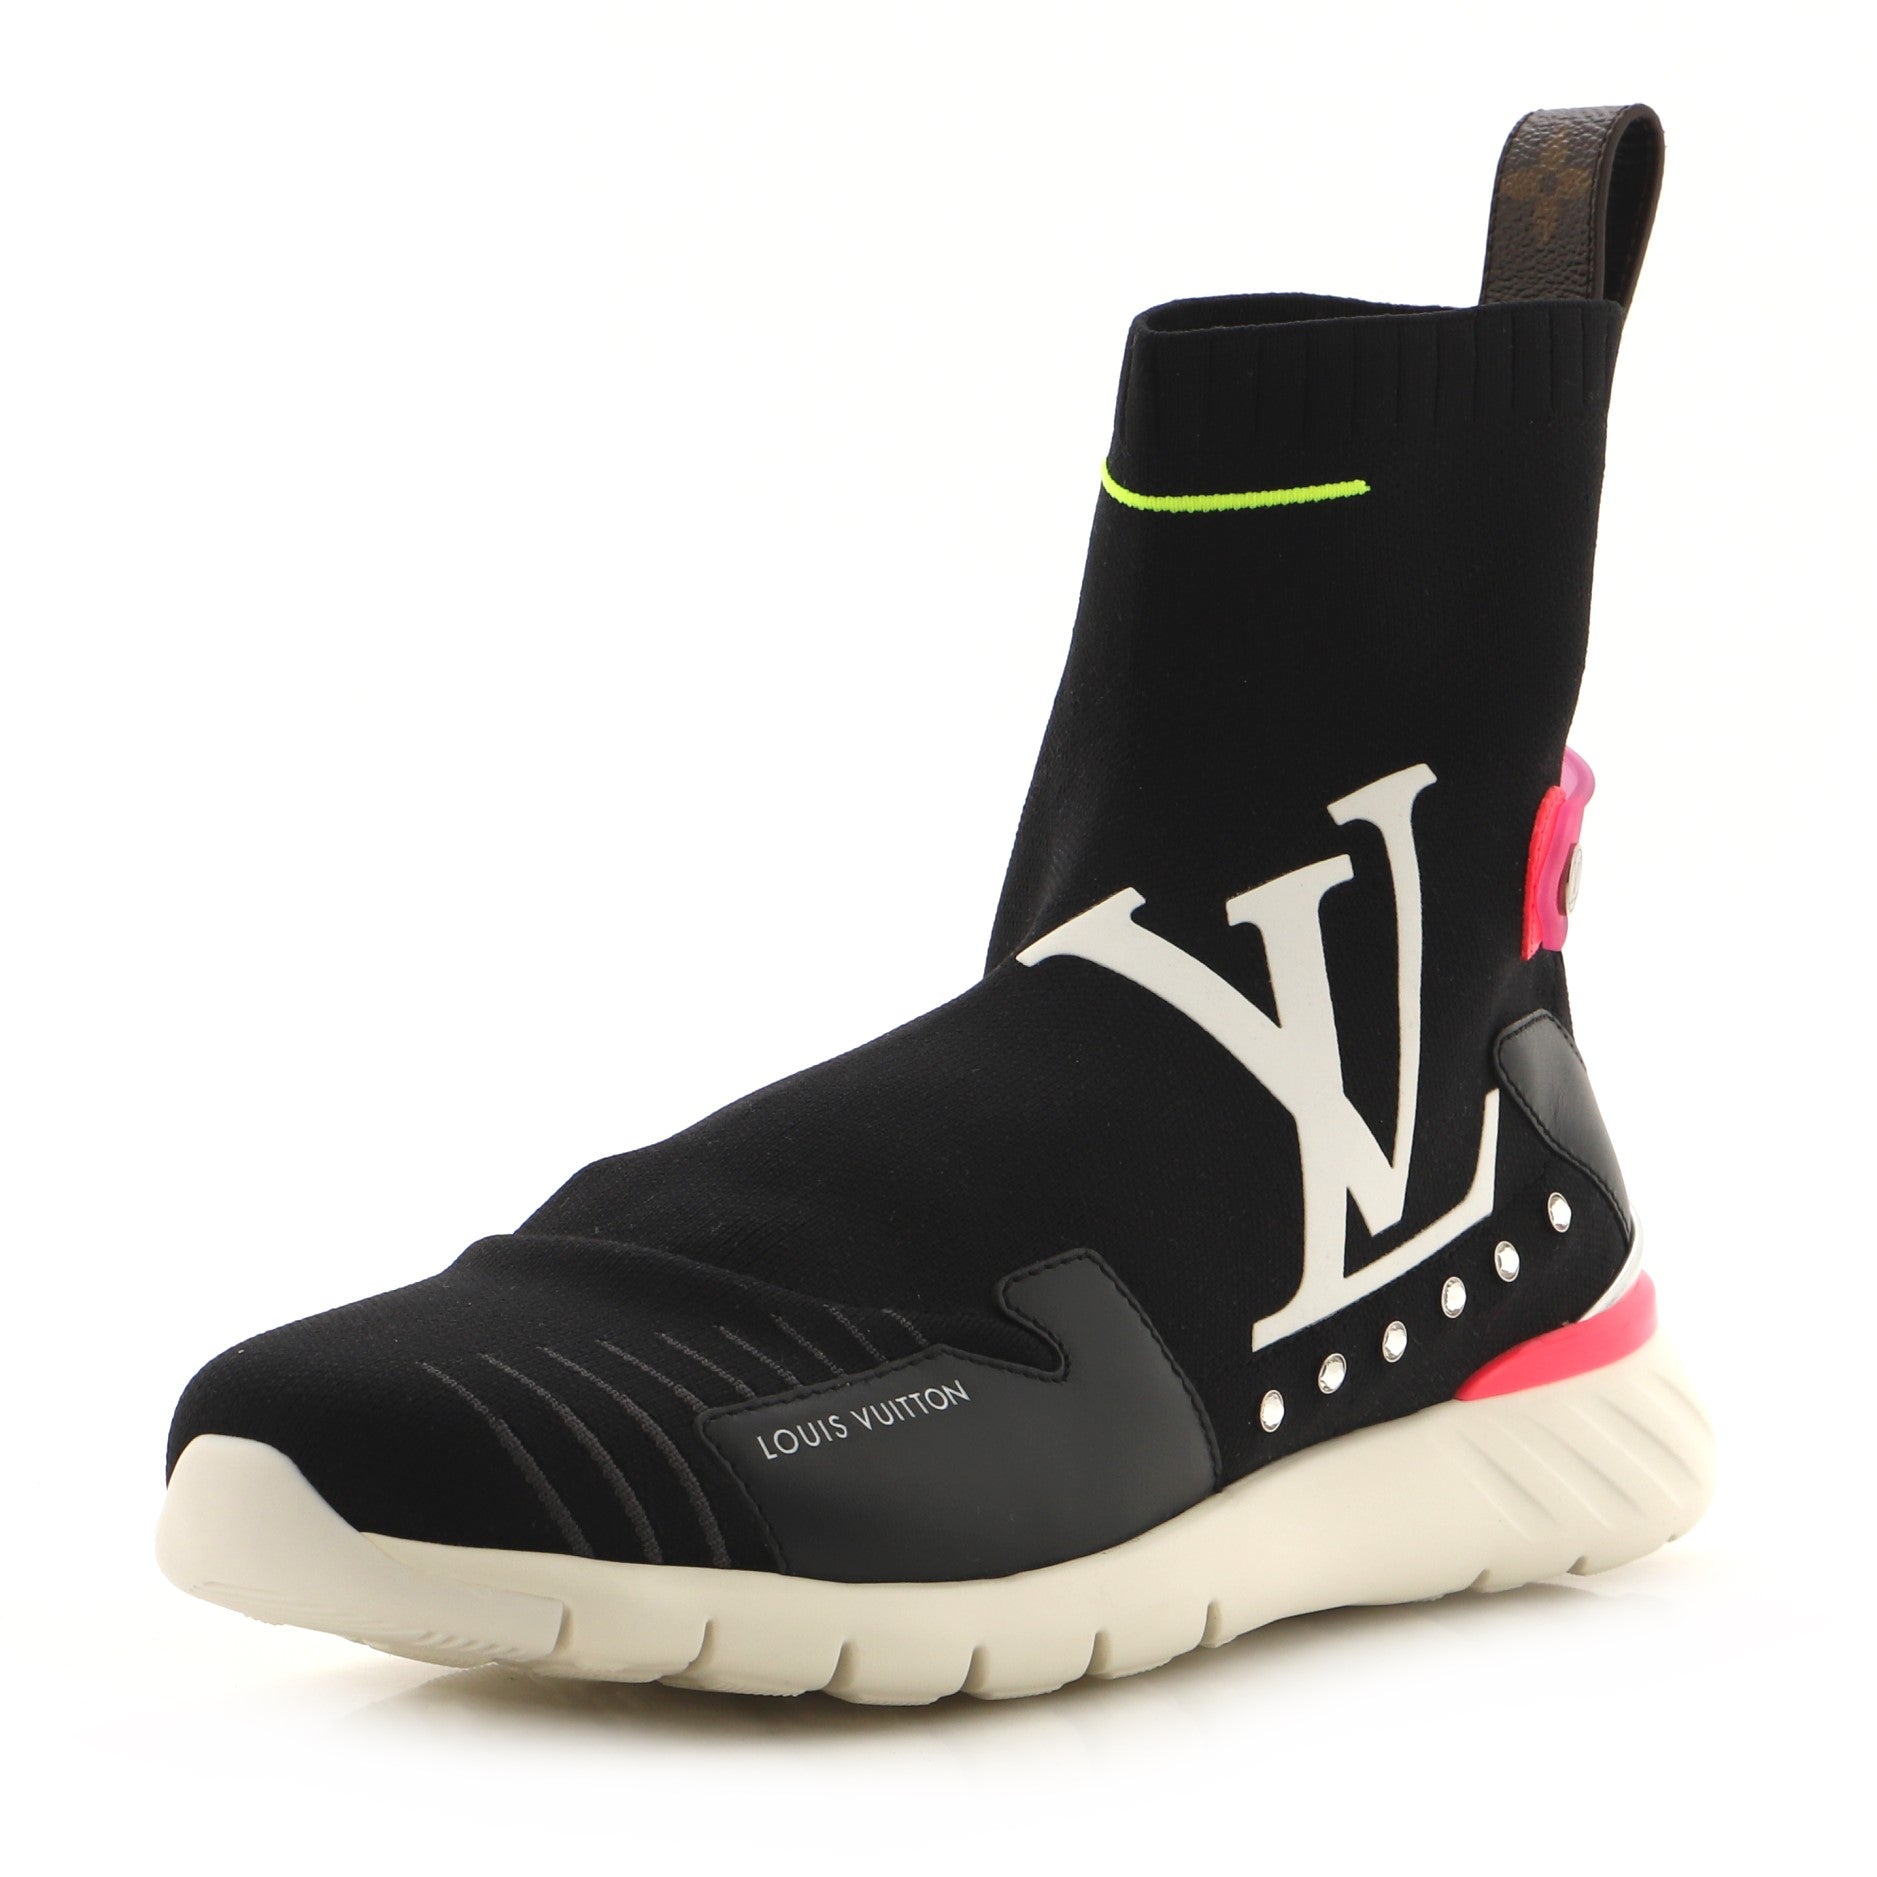 Louis Vuitton Women's Aftergame Sneaker Boots Stretch Fabric